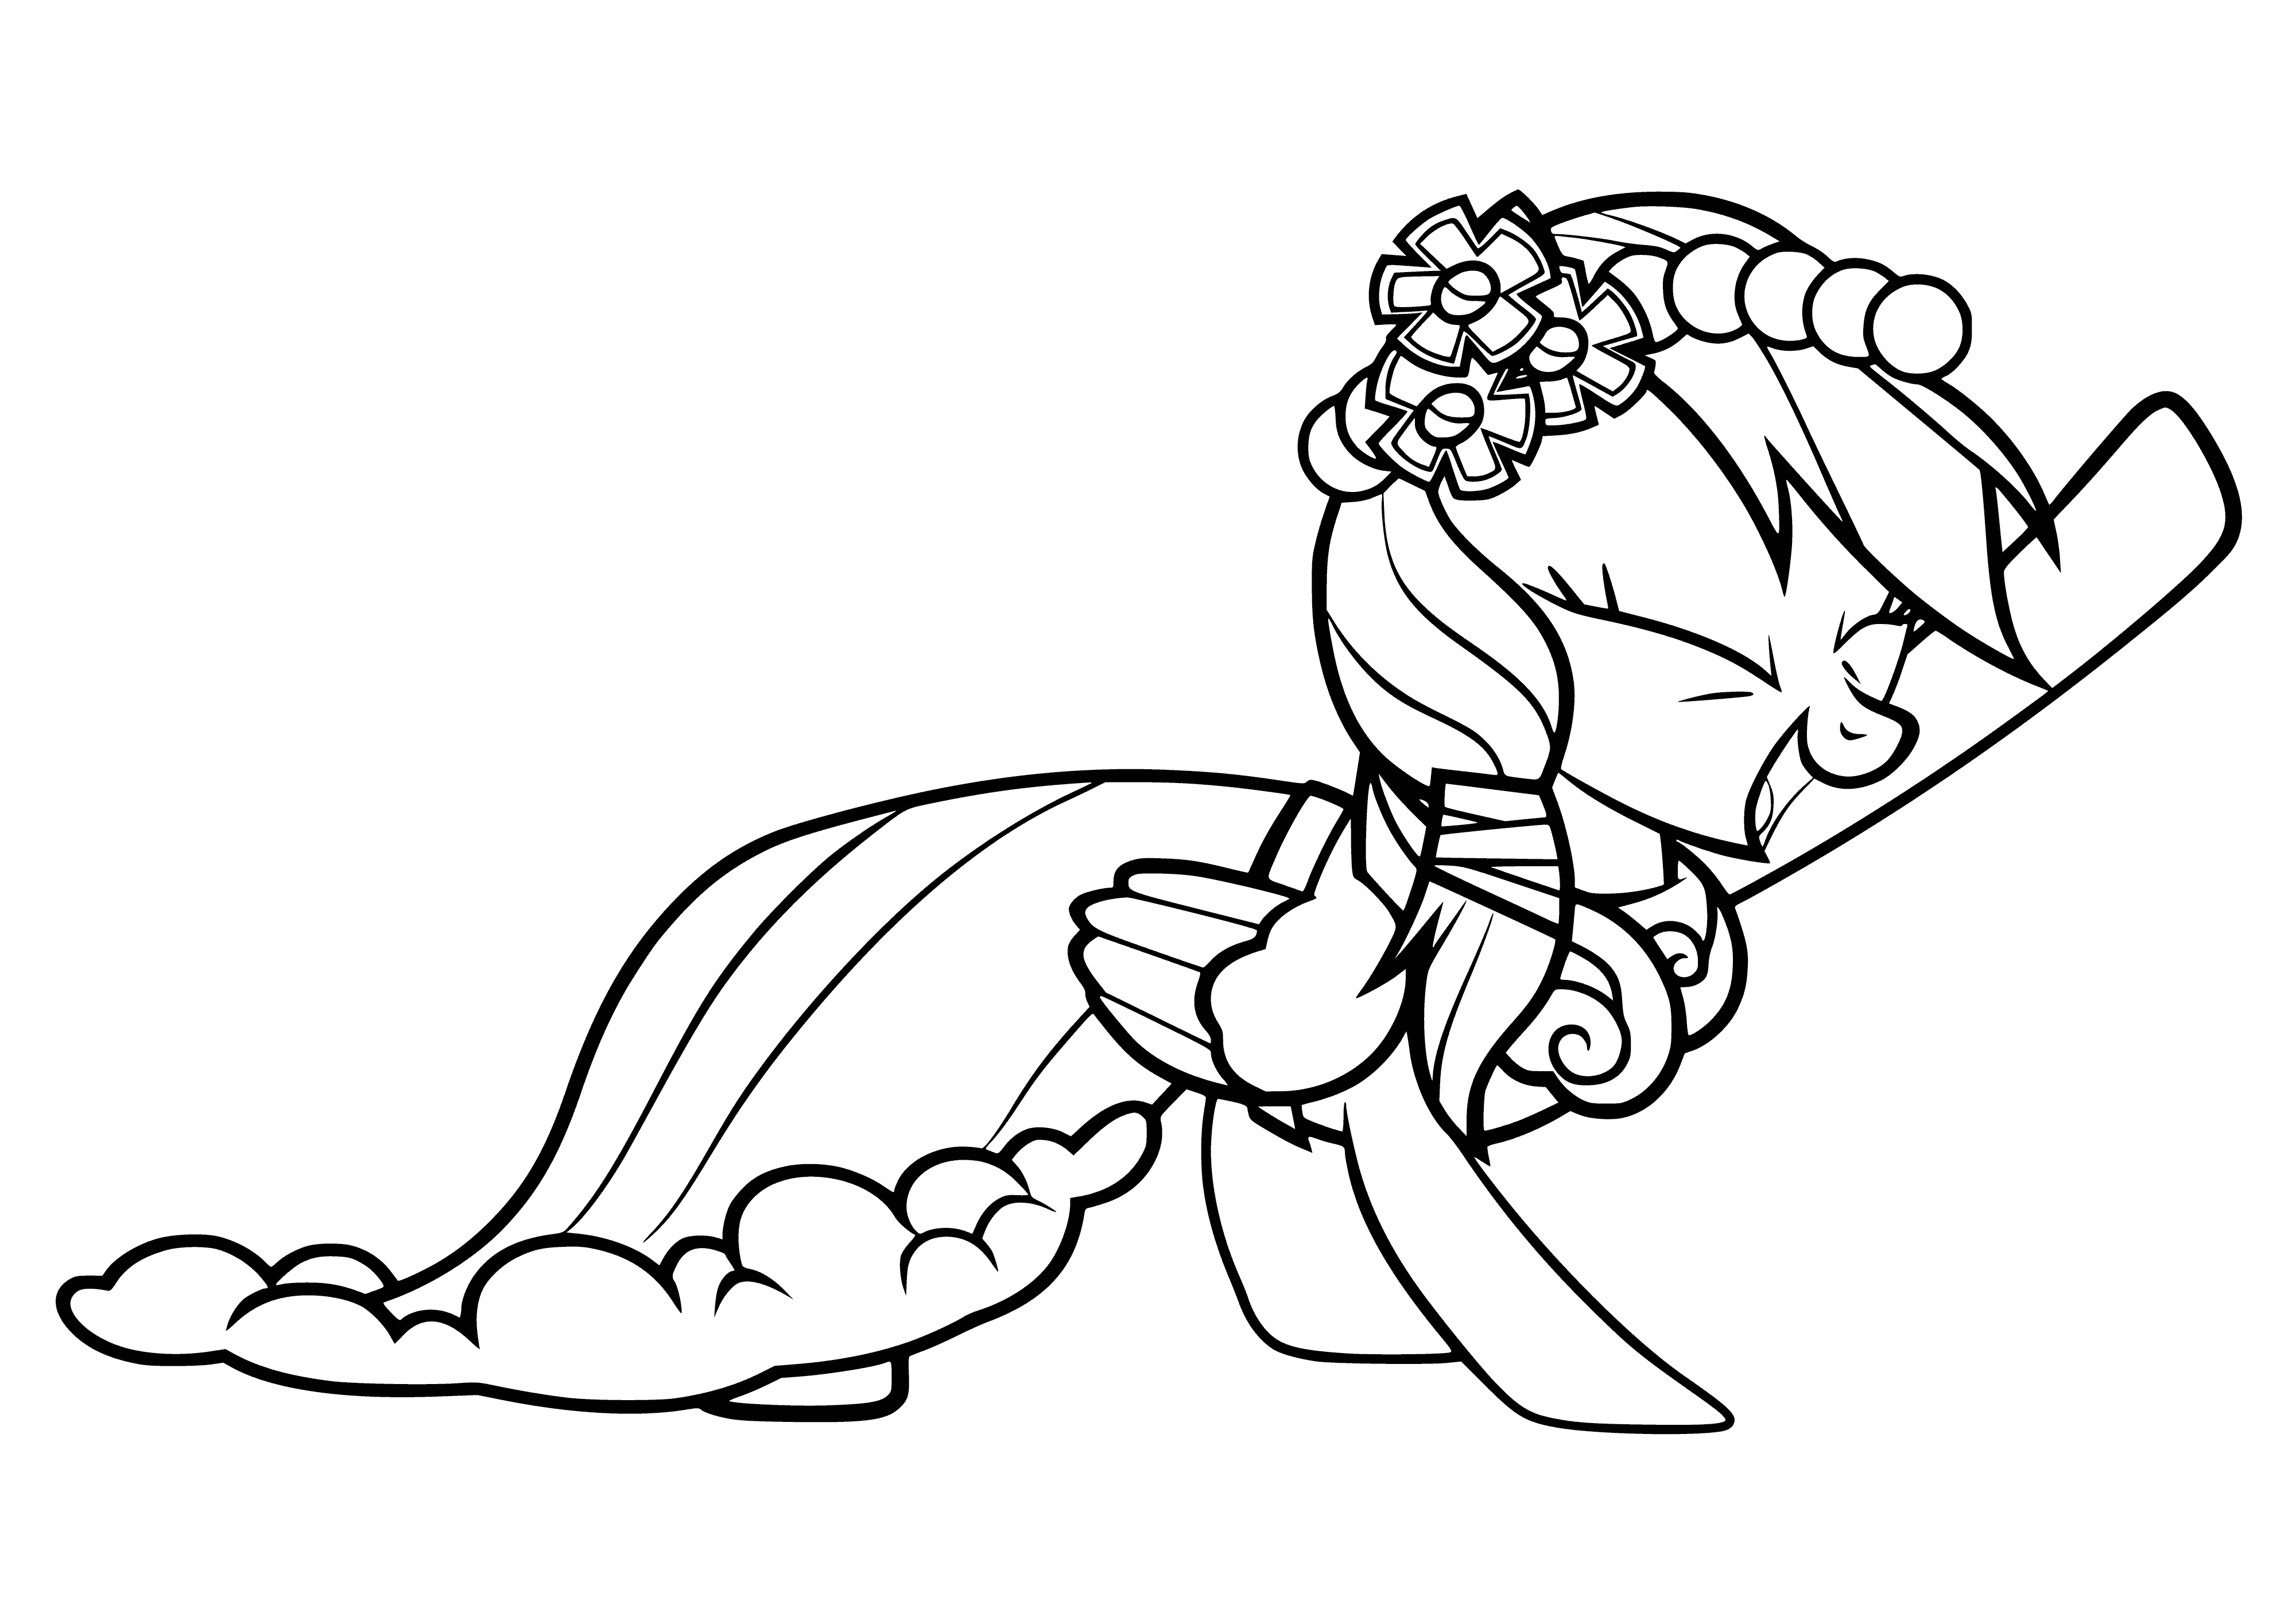 A blue horse with rainbow mane and tail stands on hind legs with wings spread out. #coloringpage